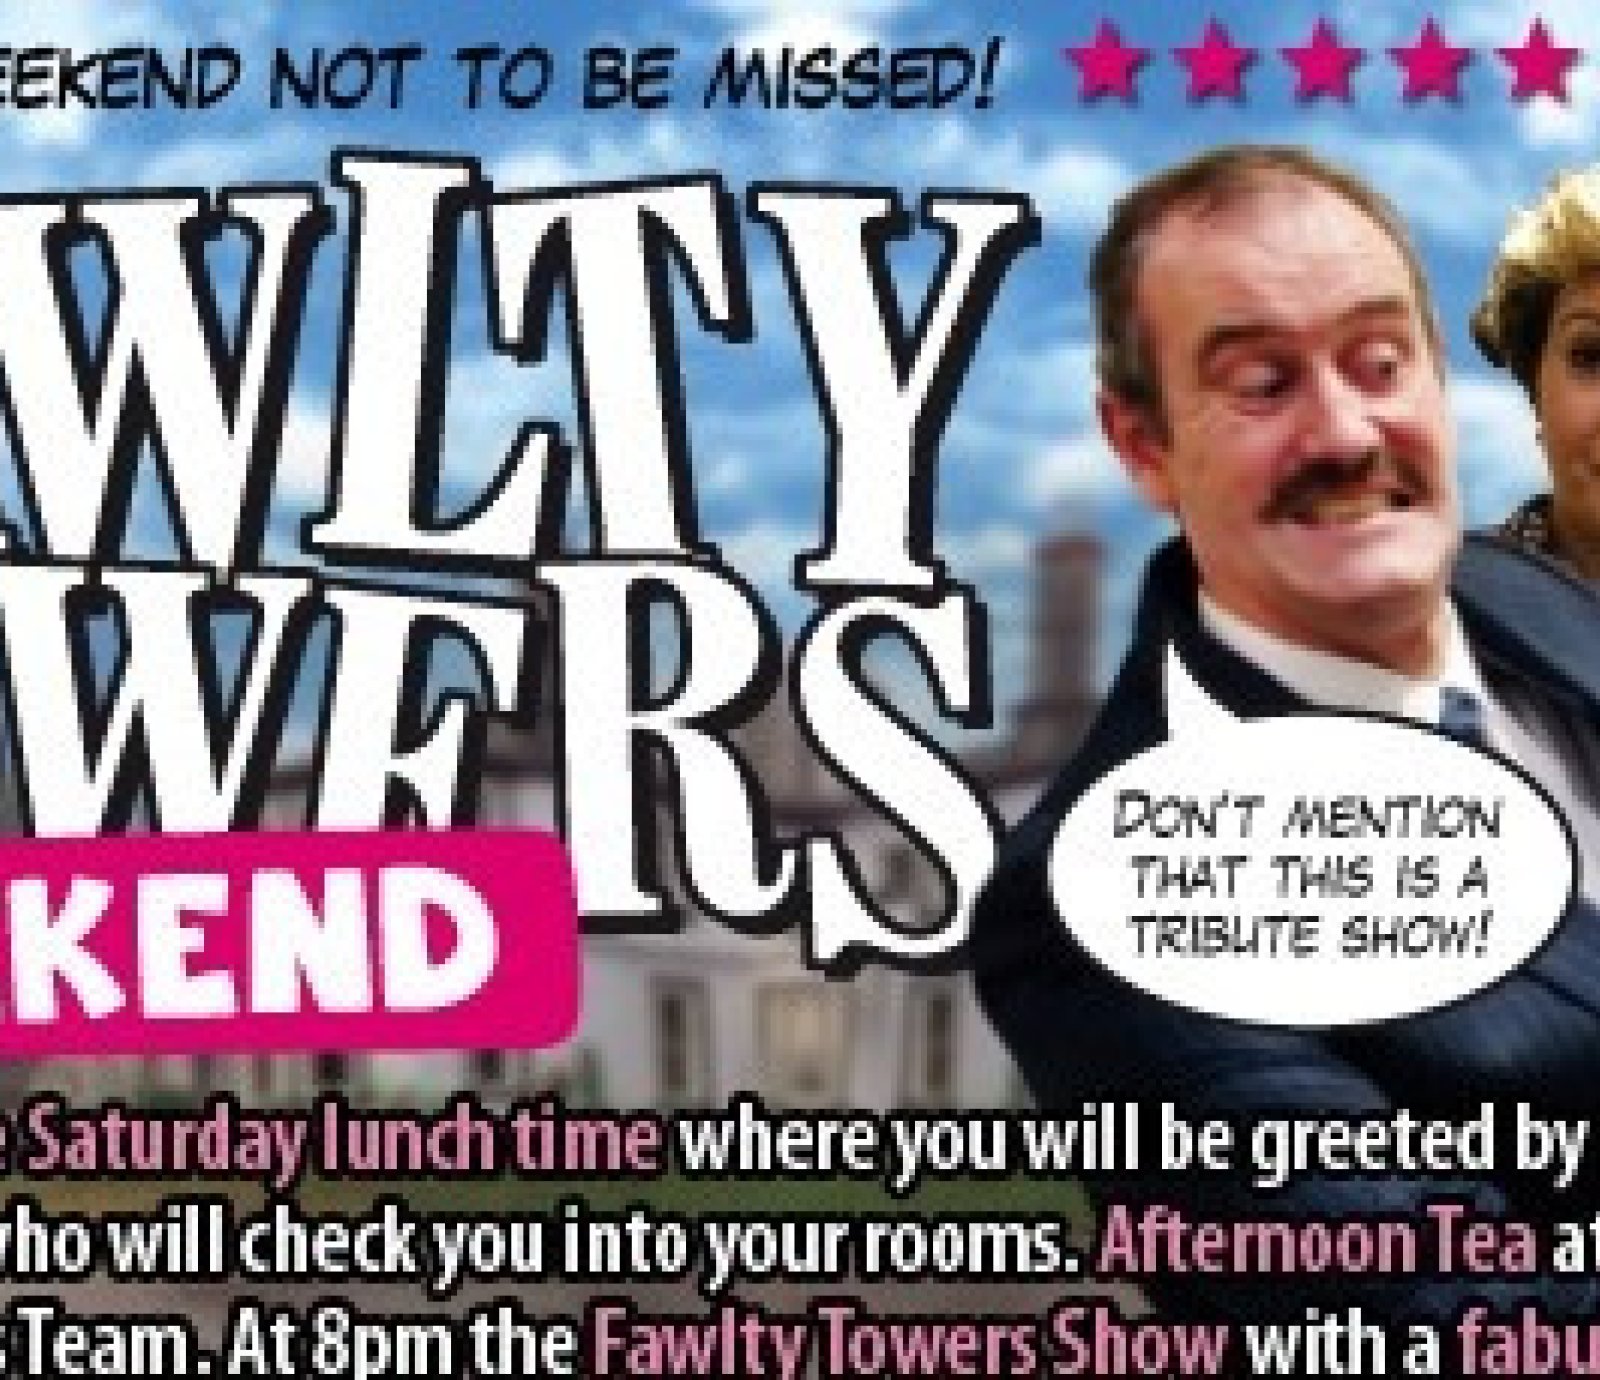 Fawlty Towers Weekend